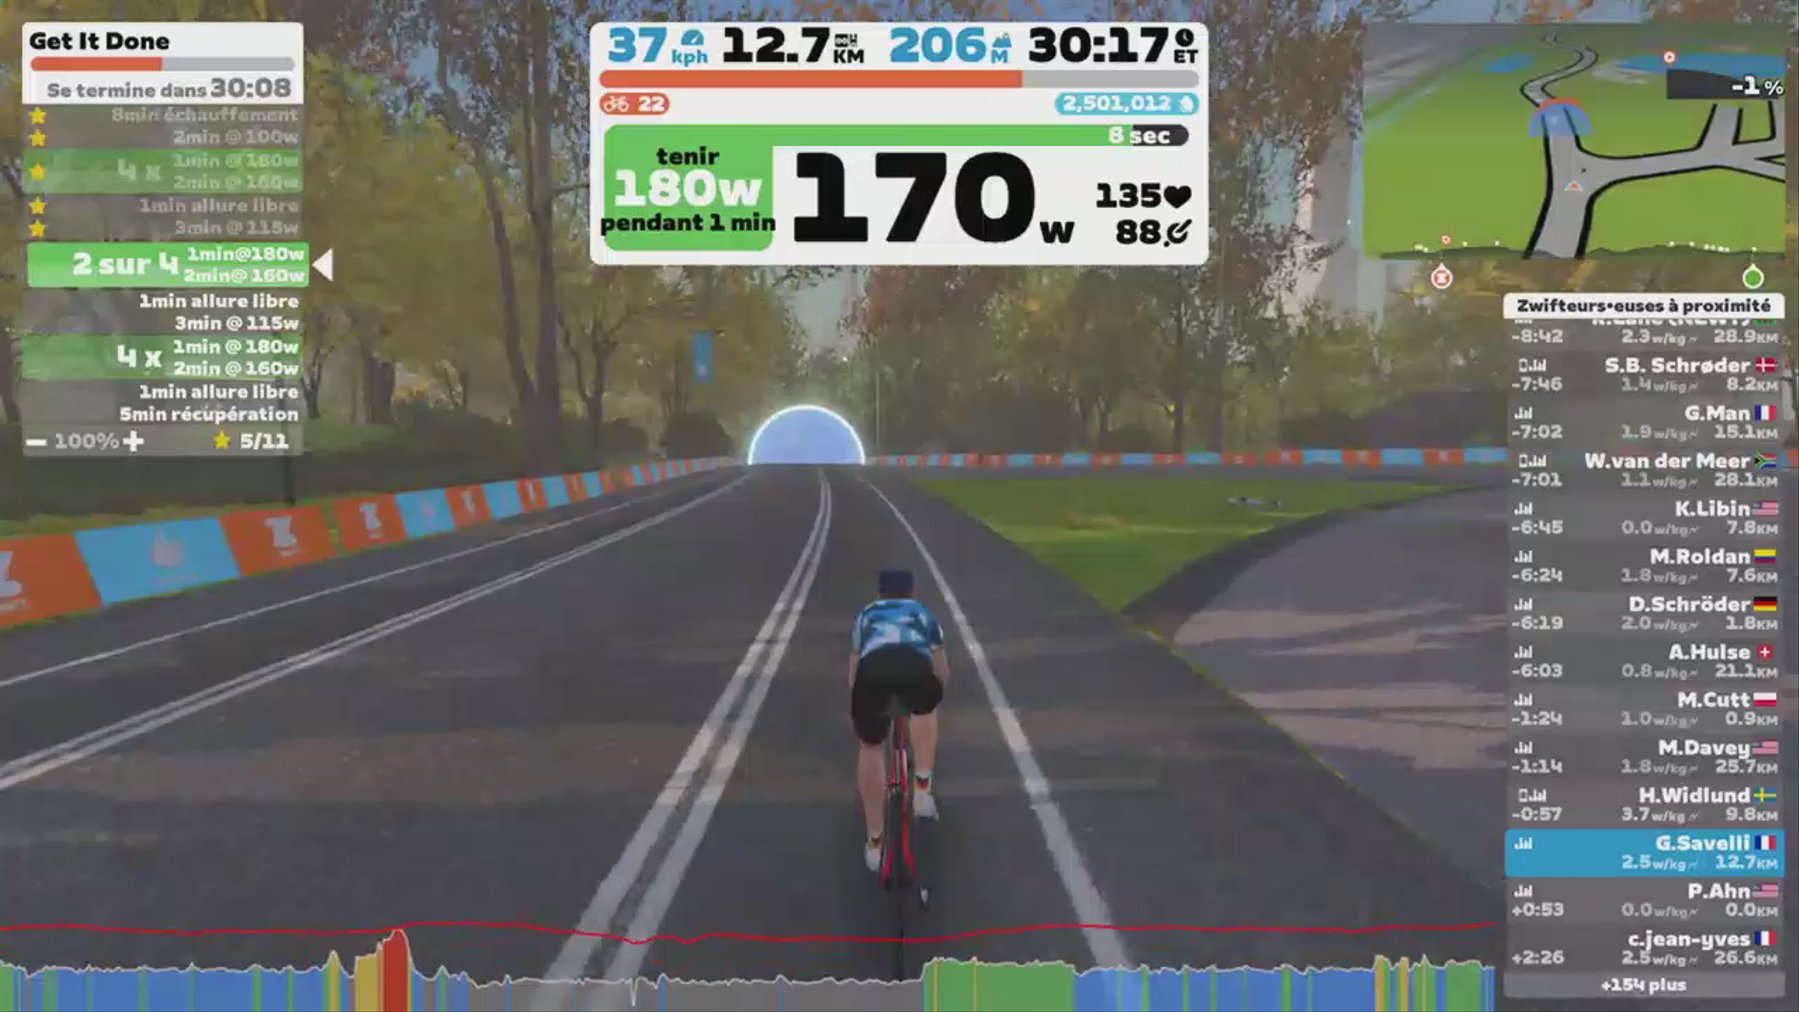 Zwift - Get It Done in New York